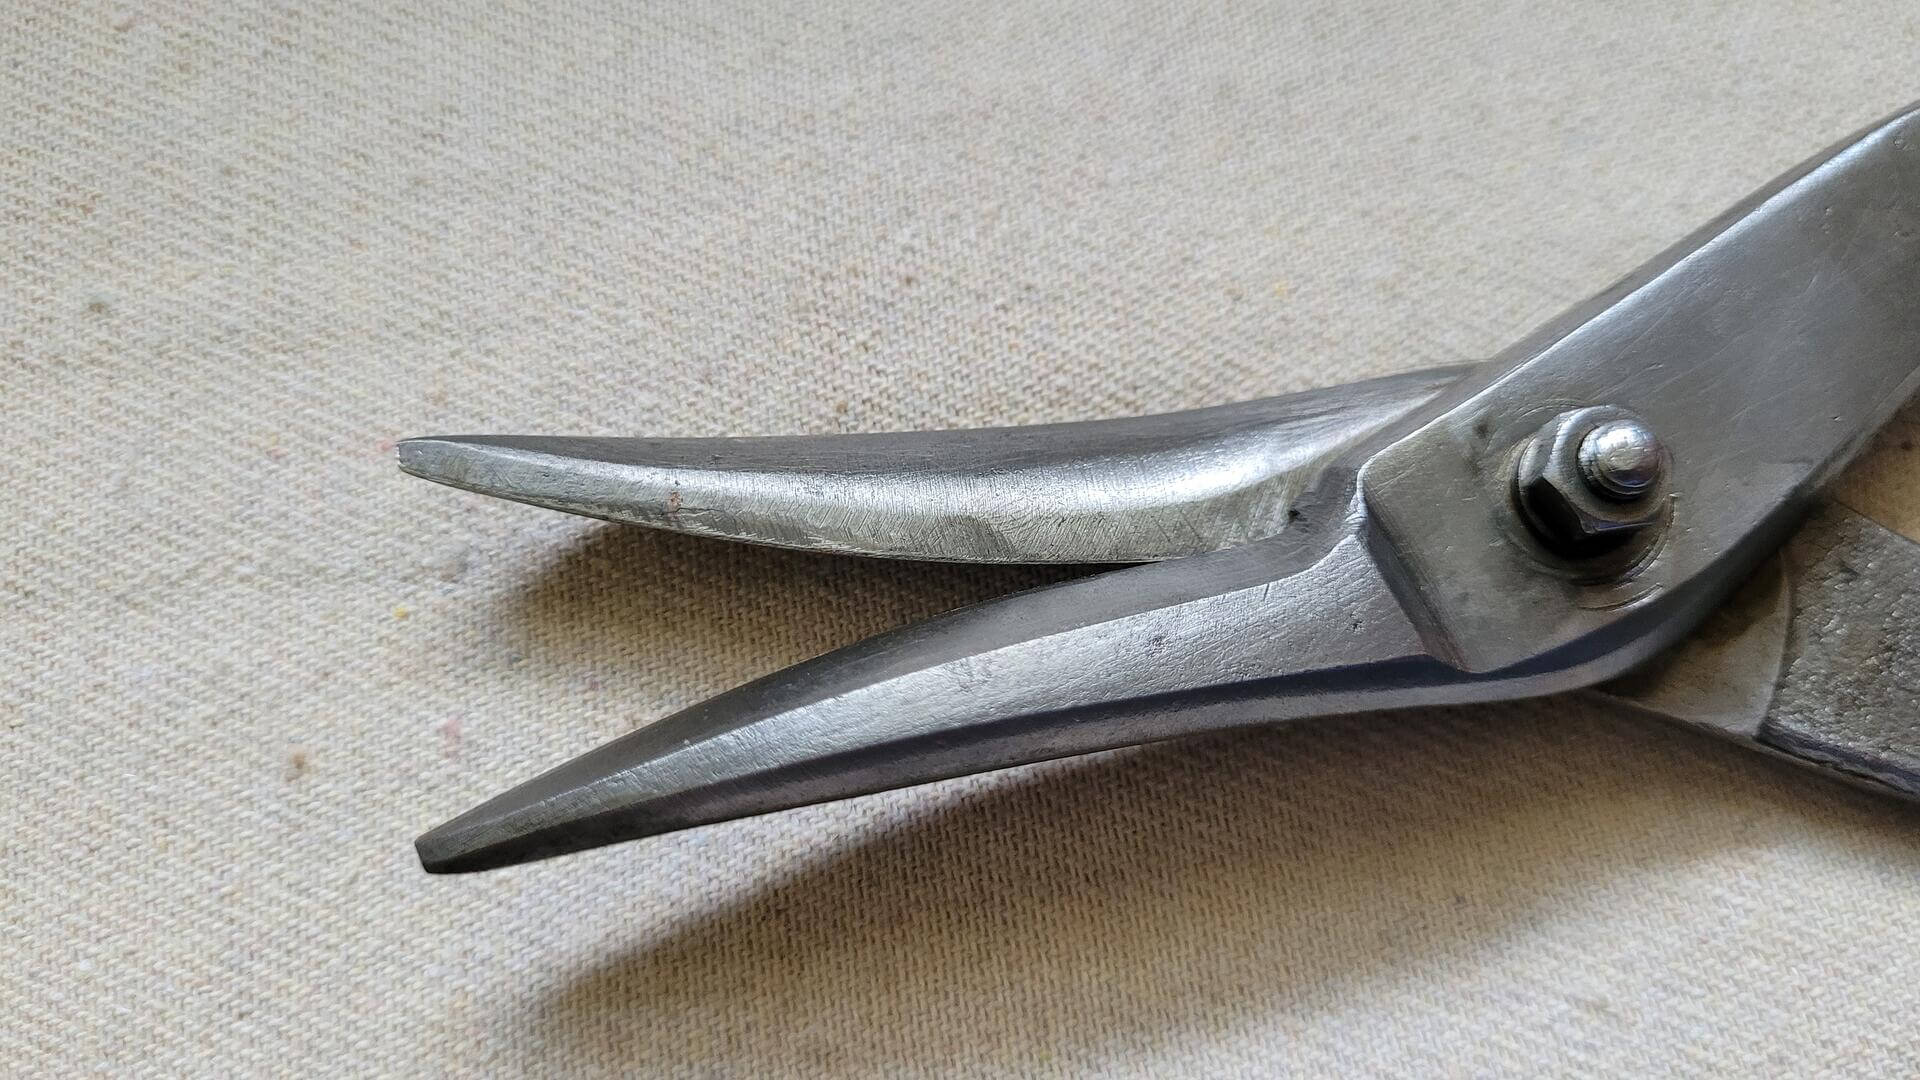 Rare 10 Inch Forged Steel Tin Snips Made in Germany by Ardex also known as the last Canadian axe maker - antique and vintage collectible cutting hand tools